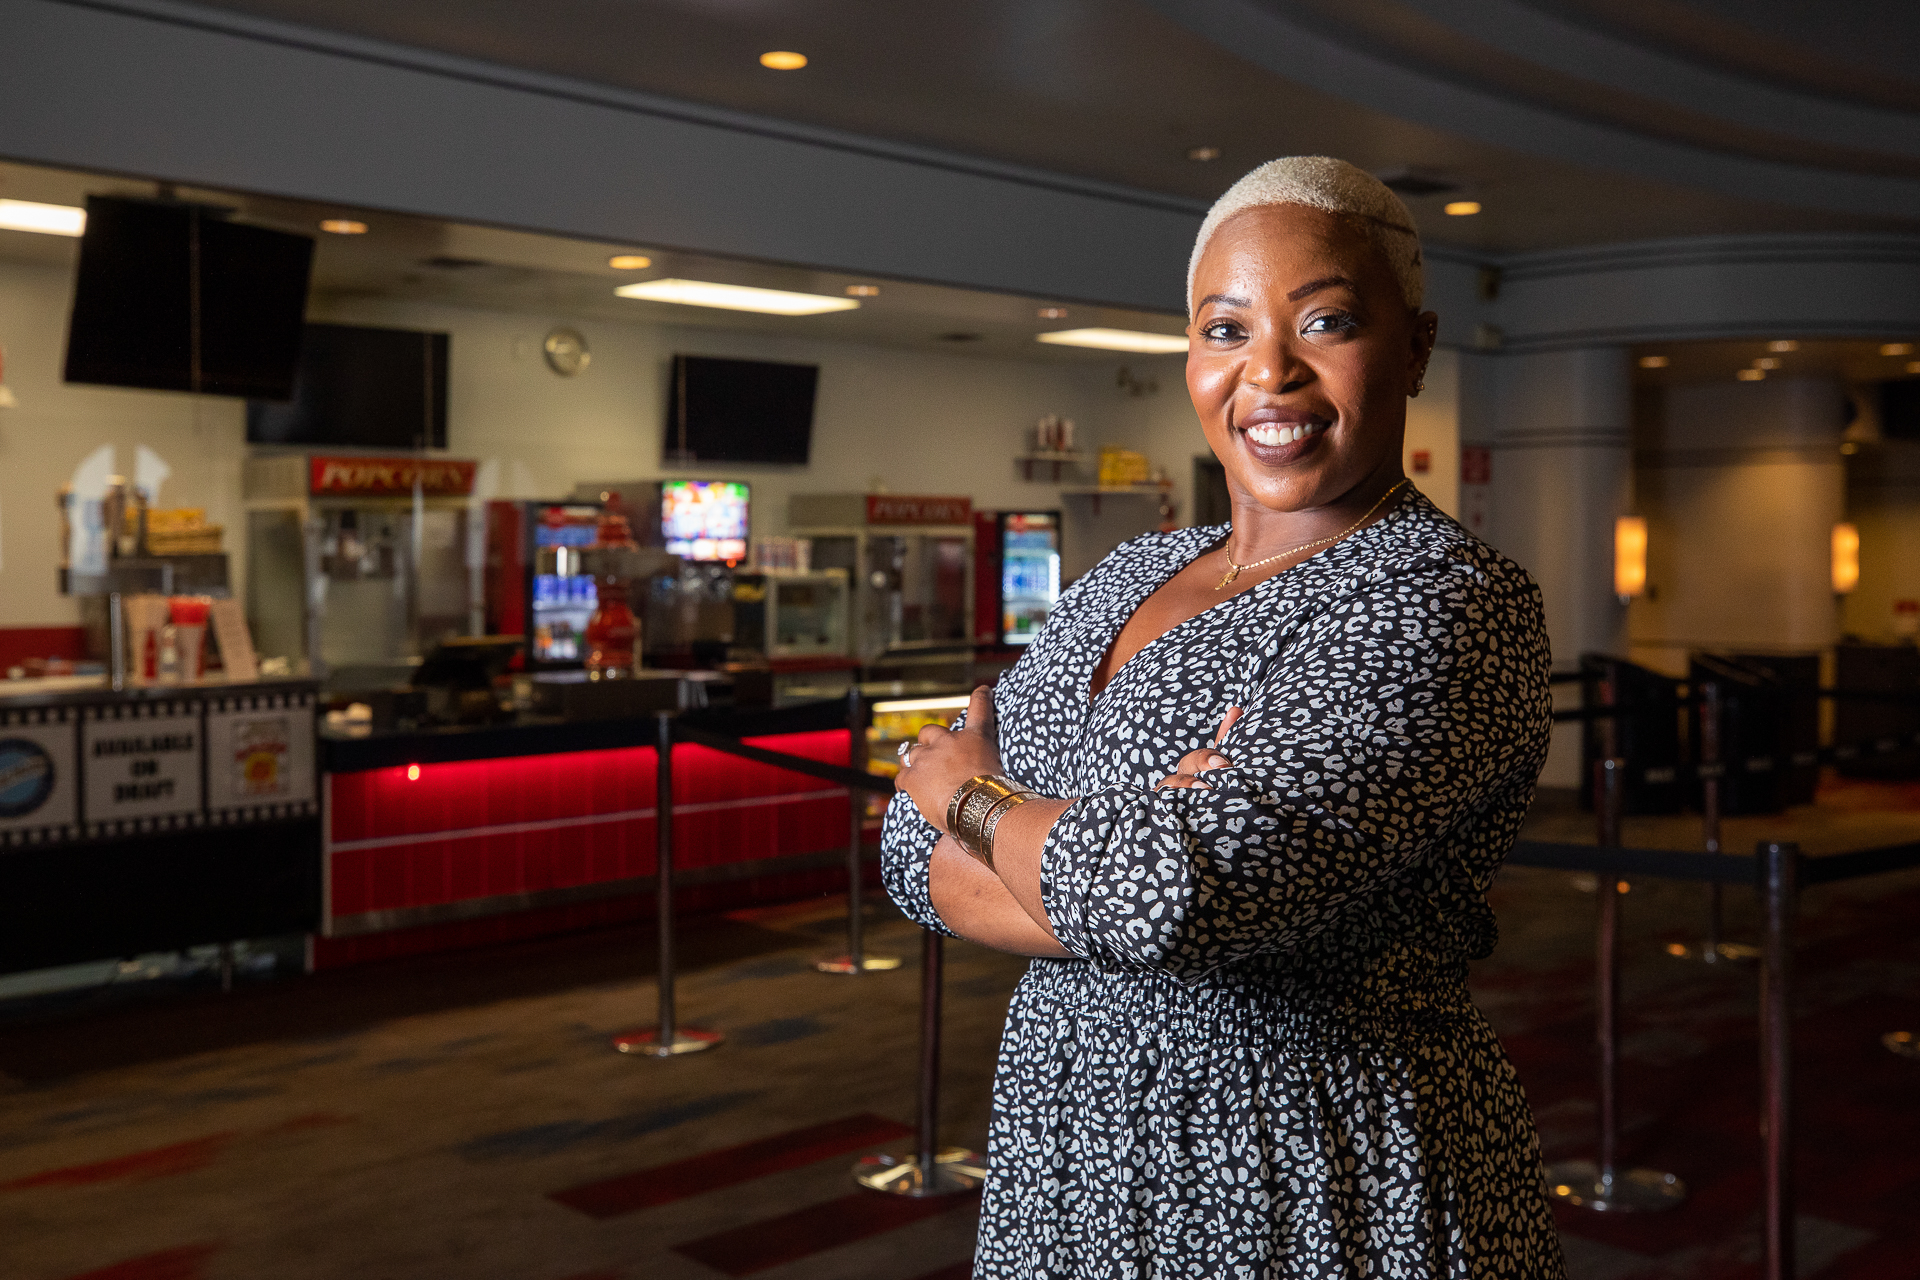 Melissa Muganzo Murphy, standing with arms crossed, looking at the camera, in the lobby of a movie theater